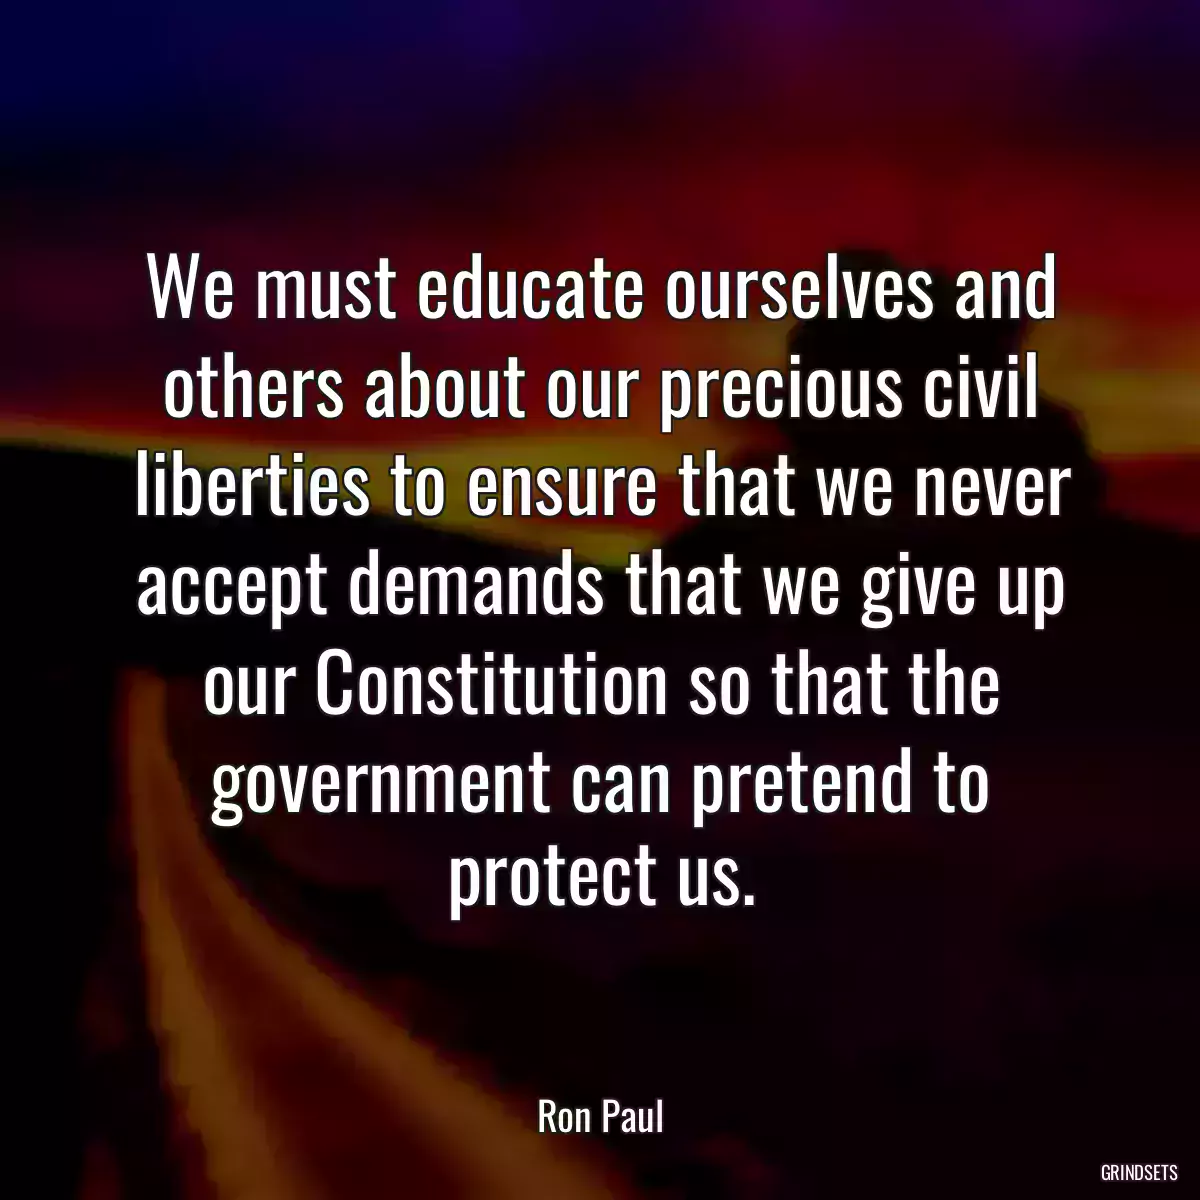 We must educate ourselves and others about our precious civil liberties to ensure that we never accept demands that we give up our Constitution so that the government can pretend to protect us.